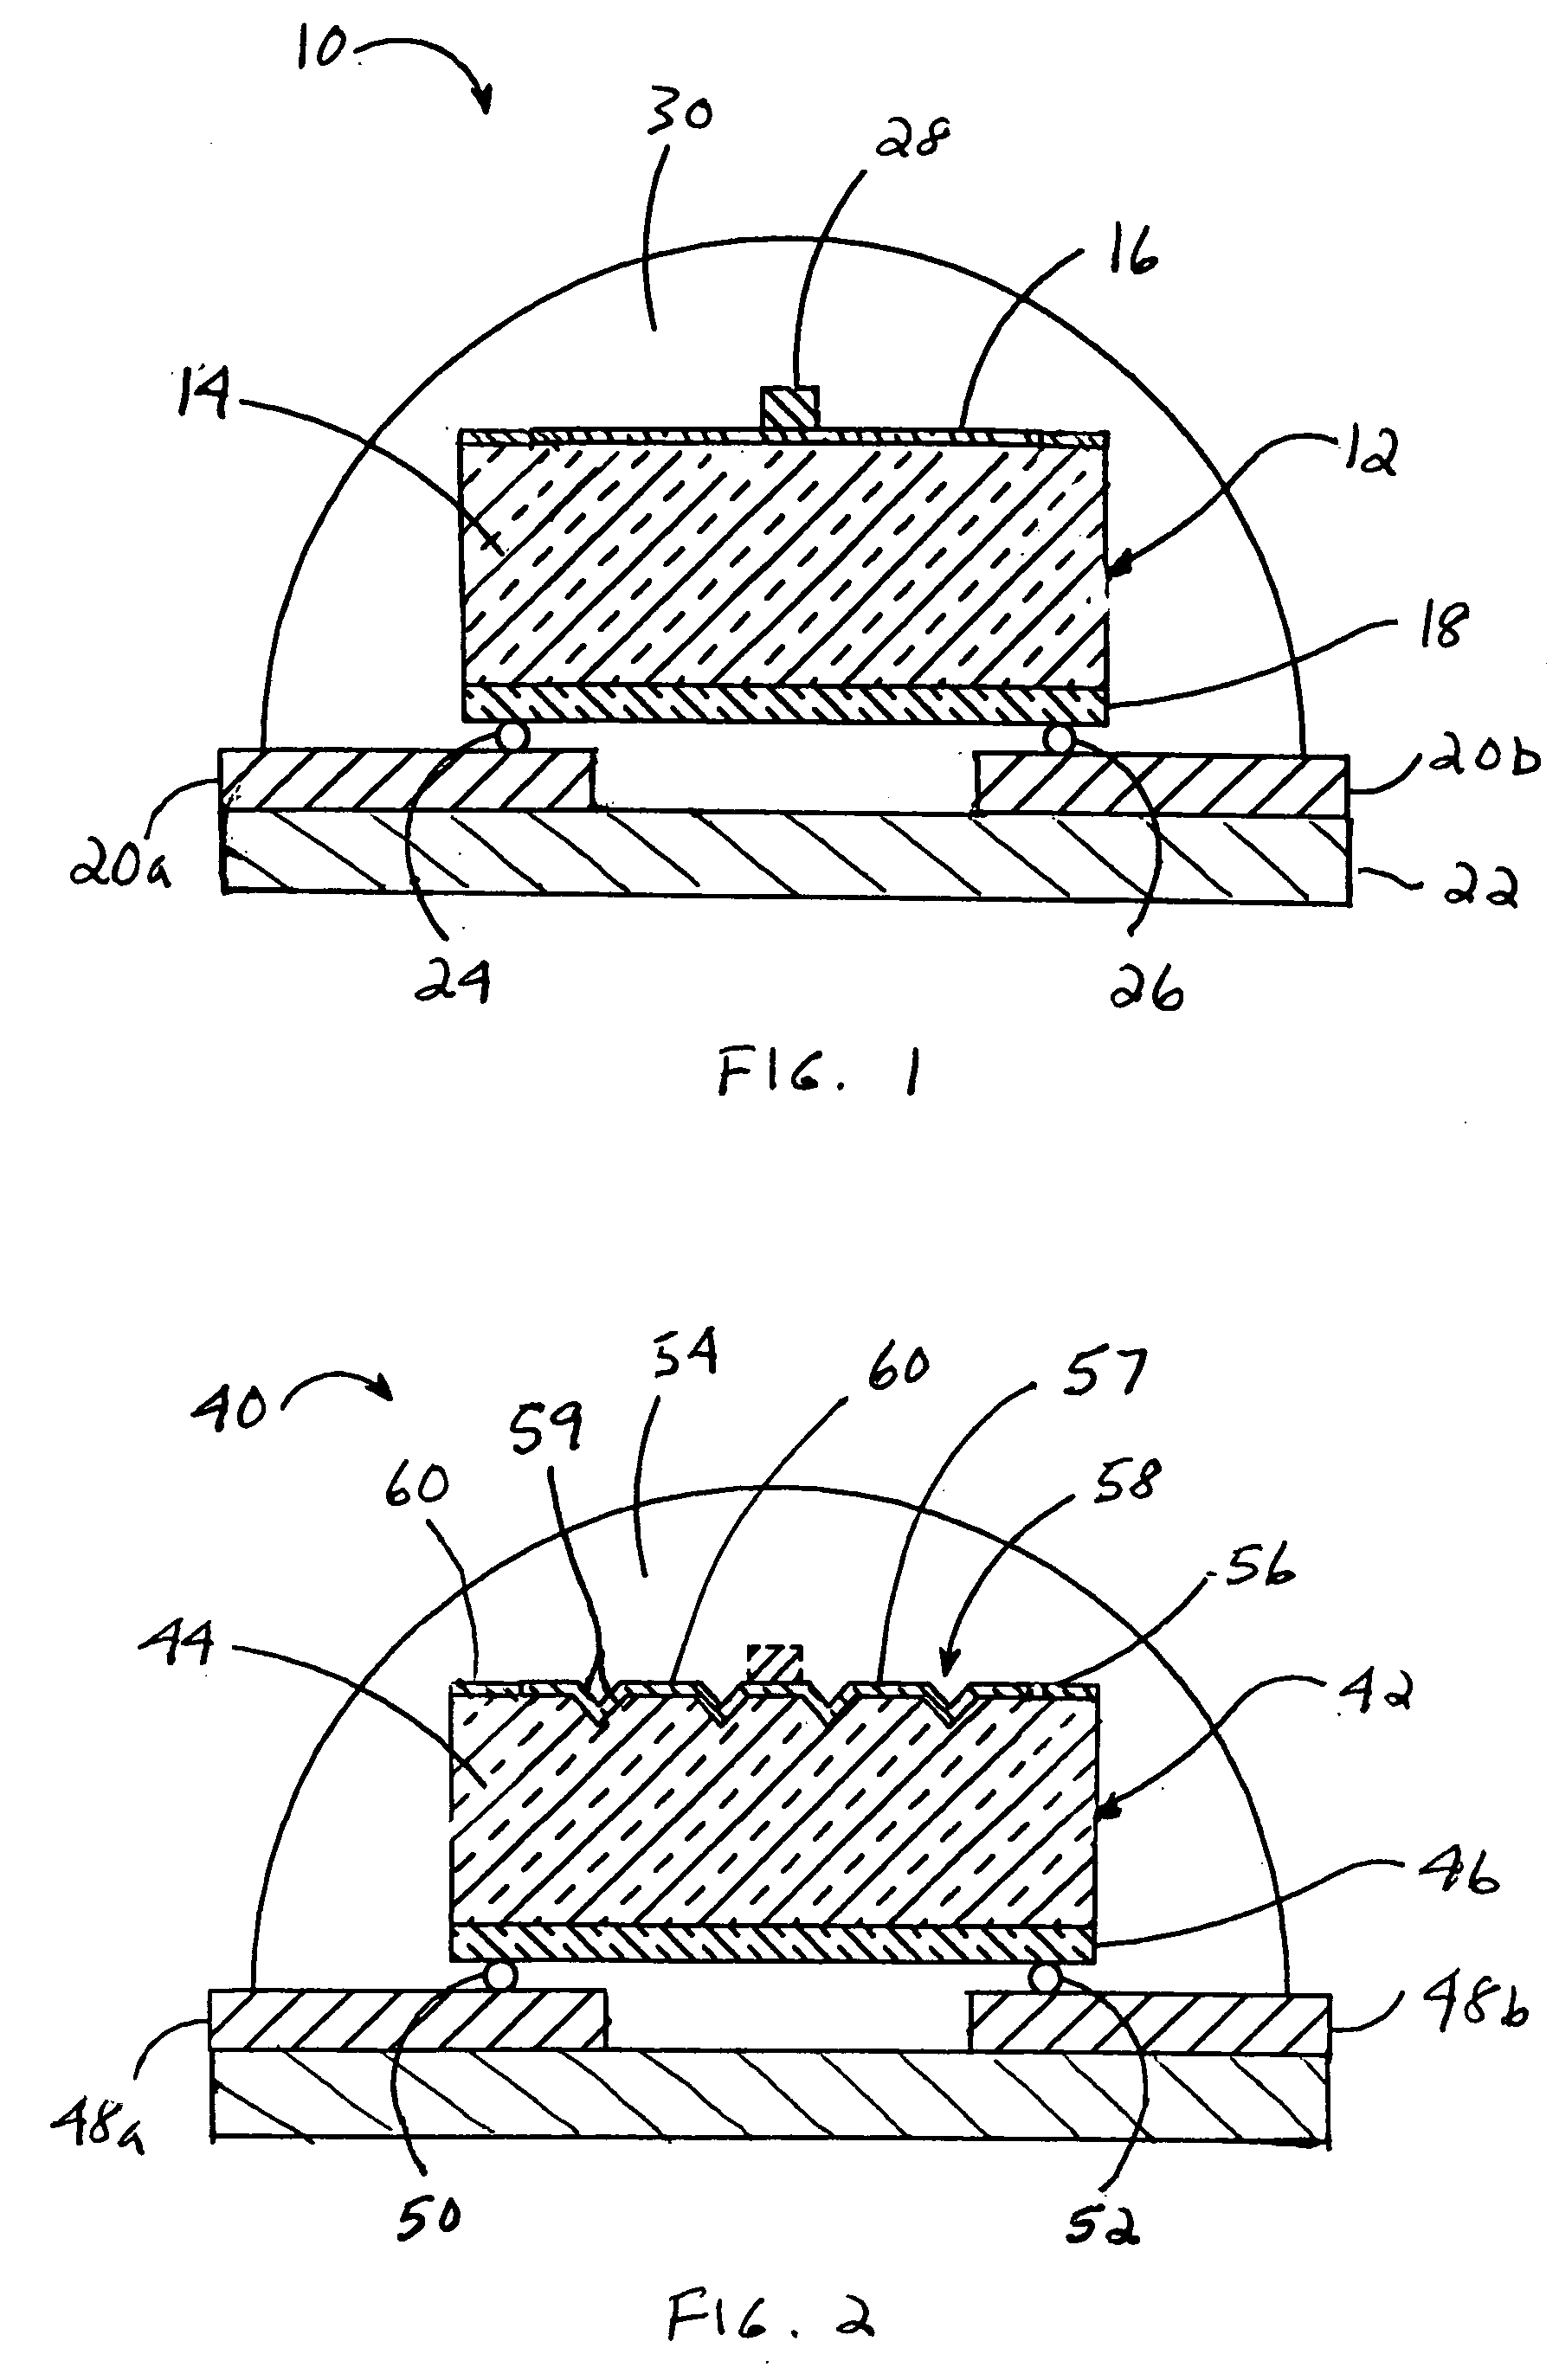 LED with substrate modifications for enhanced light extraction and method of making same